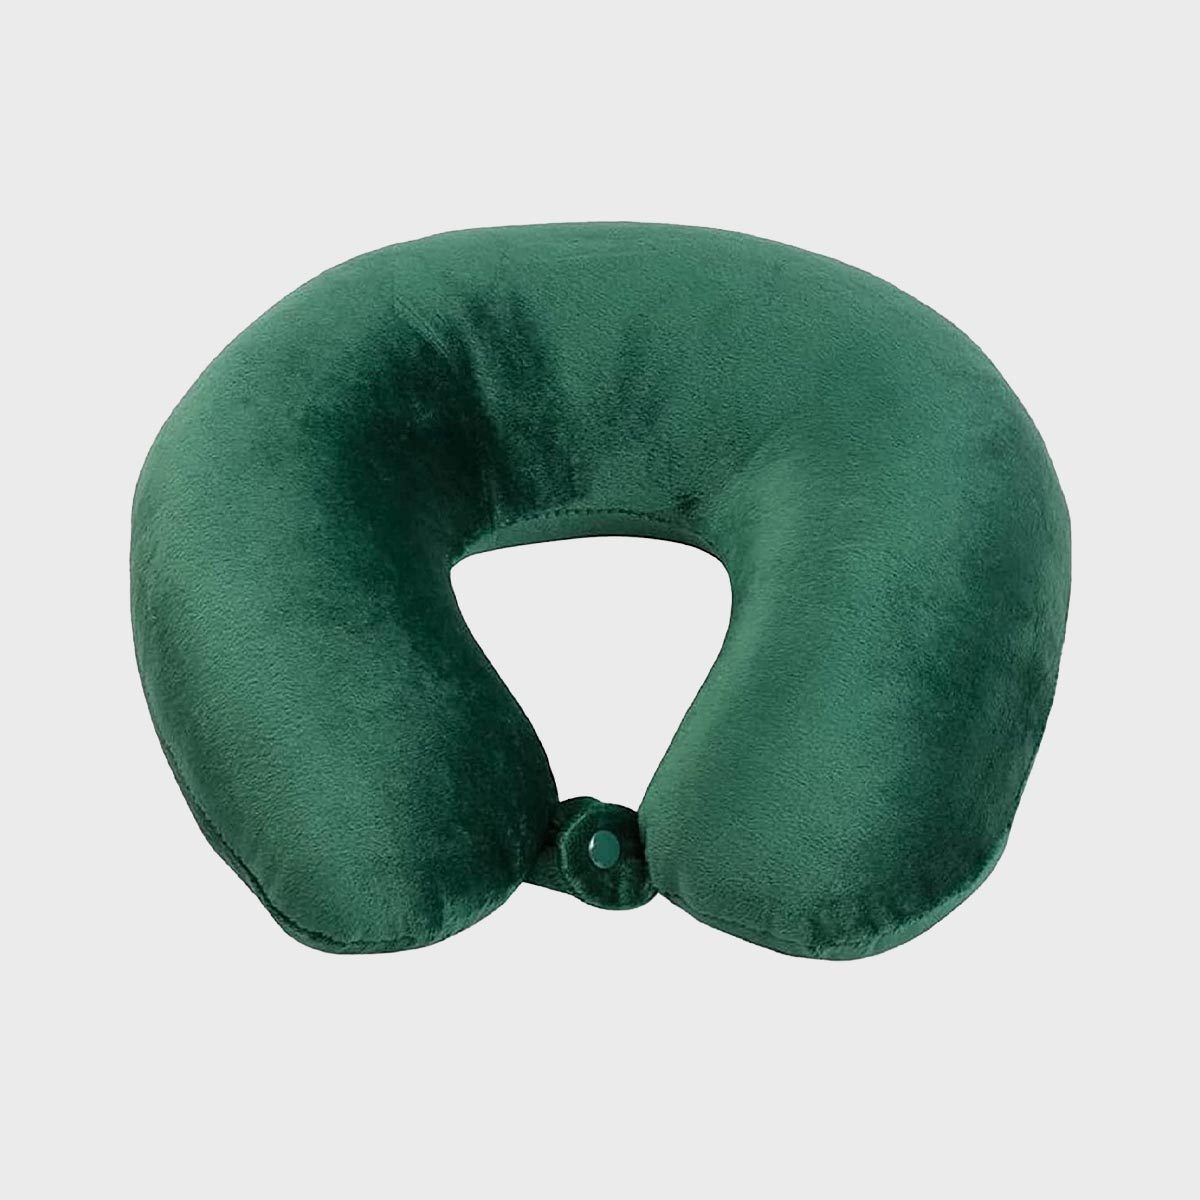 <p>The problem with a lot of neck pillows is they can push your neck forward uncomfortably or get misshapen when packed. Travelers won't have that issue with this affordable <a href="https://www.amazon.com/Worlds-Best-Feather-Microfiber-Pillow/dp/B09MQ43YJB/" rel="noopener">fleece version</a>. Each side of the <a href="https://www.rd.com/list/travel-pillow-experts-swear-by/">travel pillow</a> offers support for the neck. Its hypoallergenic fleece covering, microfiber filling and semicircular shape empower tired flyers to sleep soundly with a supported head, neck and shoulders. Plus, it's machine washable, so you can rid of those plane germs in between trips.</p> <p class="listicle-page__cta-button-shop"><a class="shop-btn" href="https://www.amazon.com/Worlds-Best-Feather-Microfiber-Pillow/dp/B09MQ43YJB/">Shop Now</a></p>